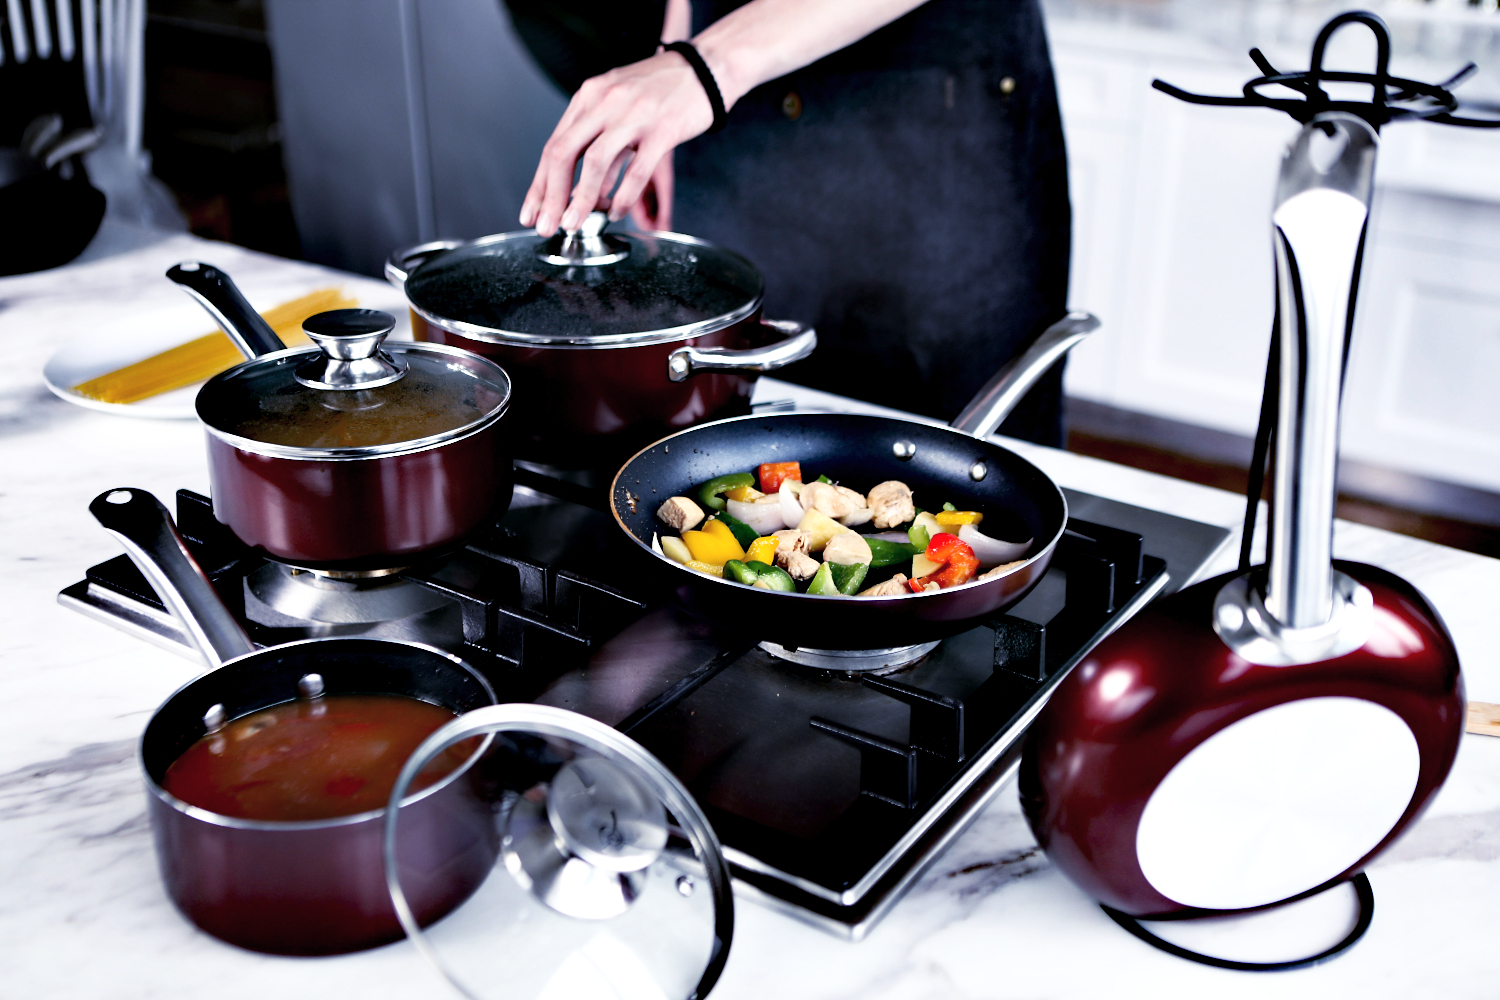 Best Pots And Pans For Gas Stove Cooktops: 2022 Epic Guide